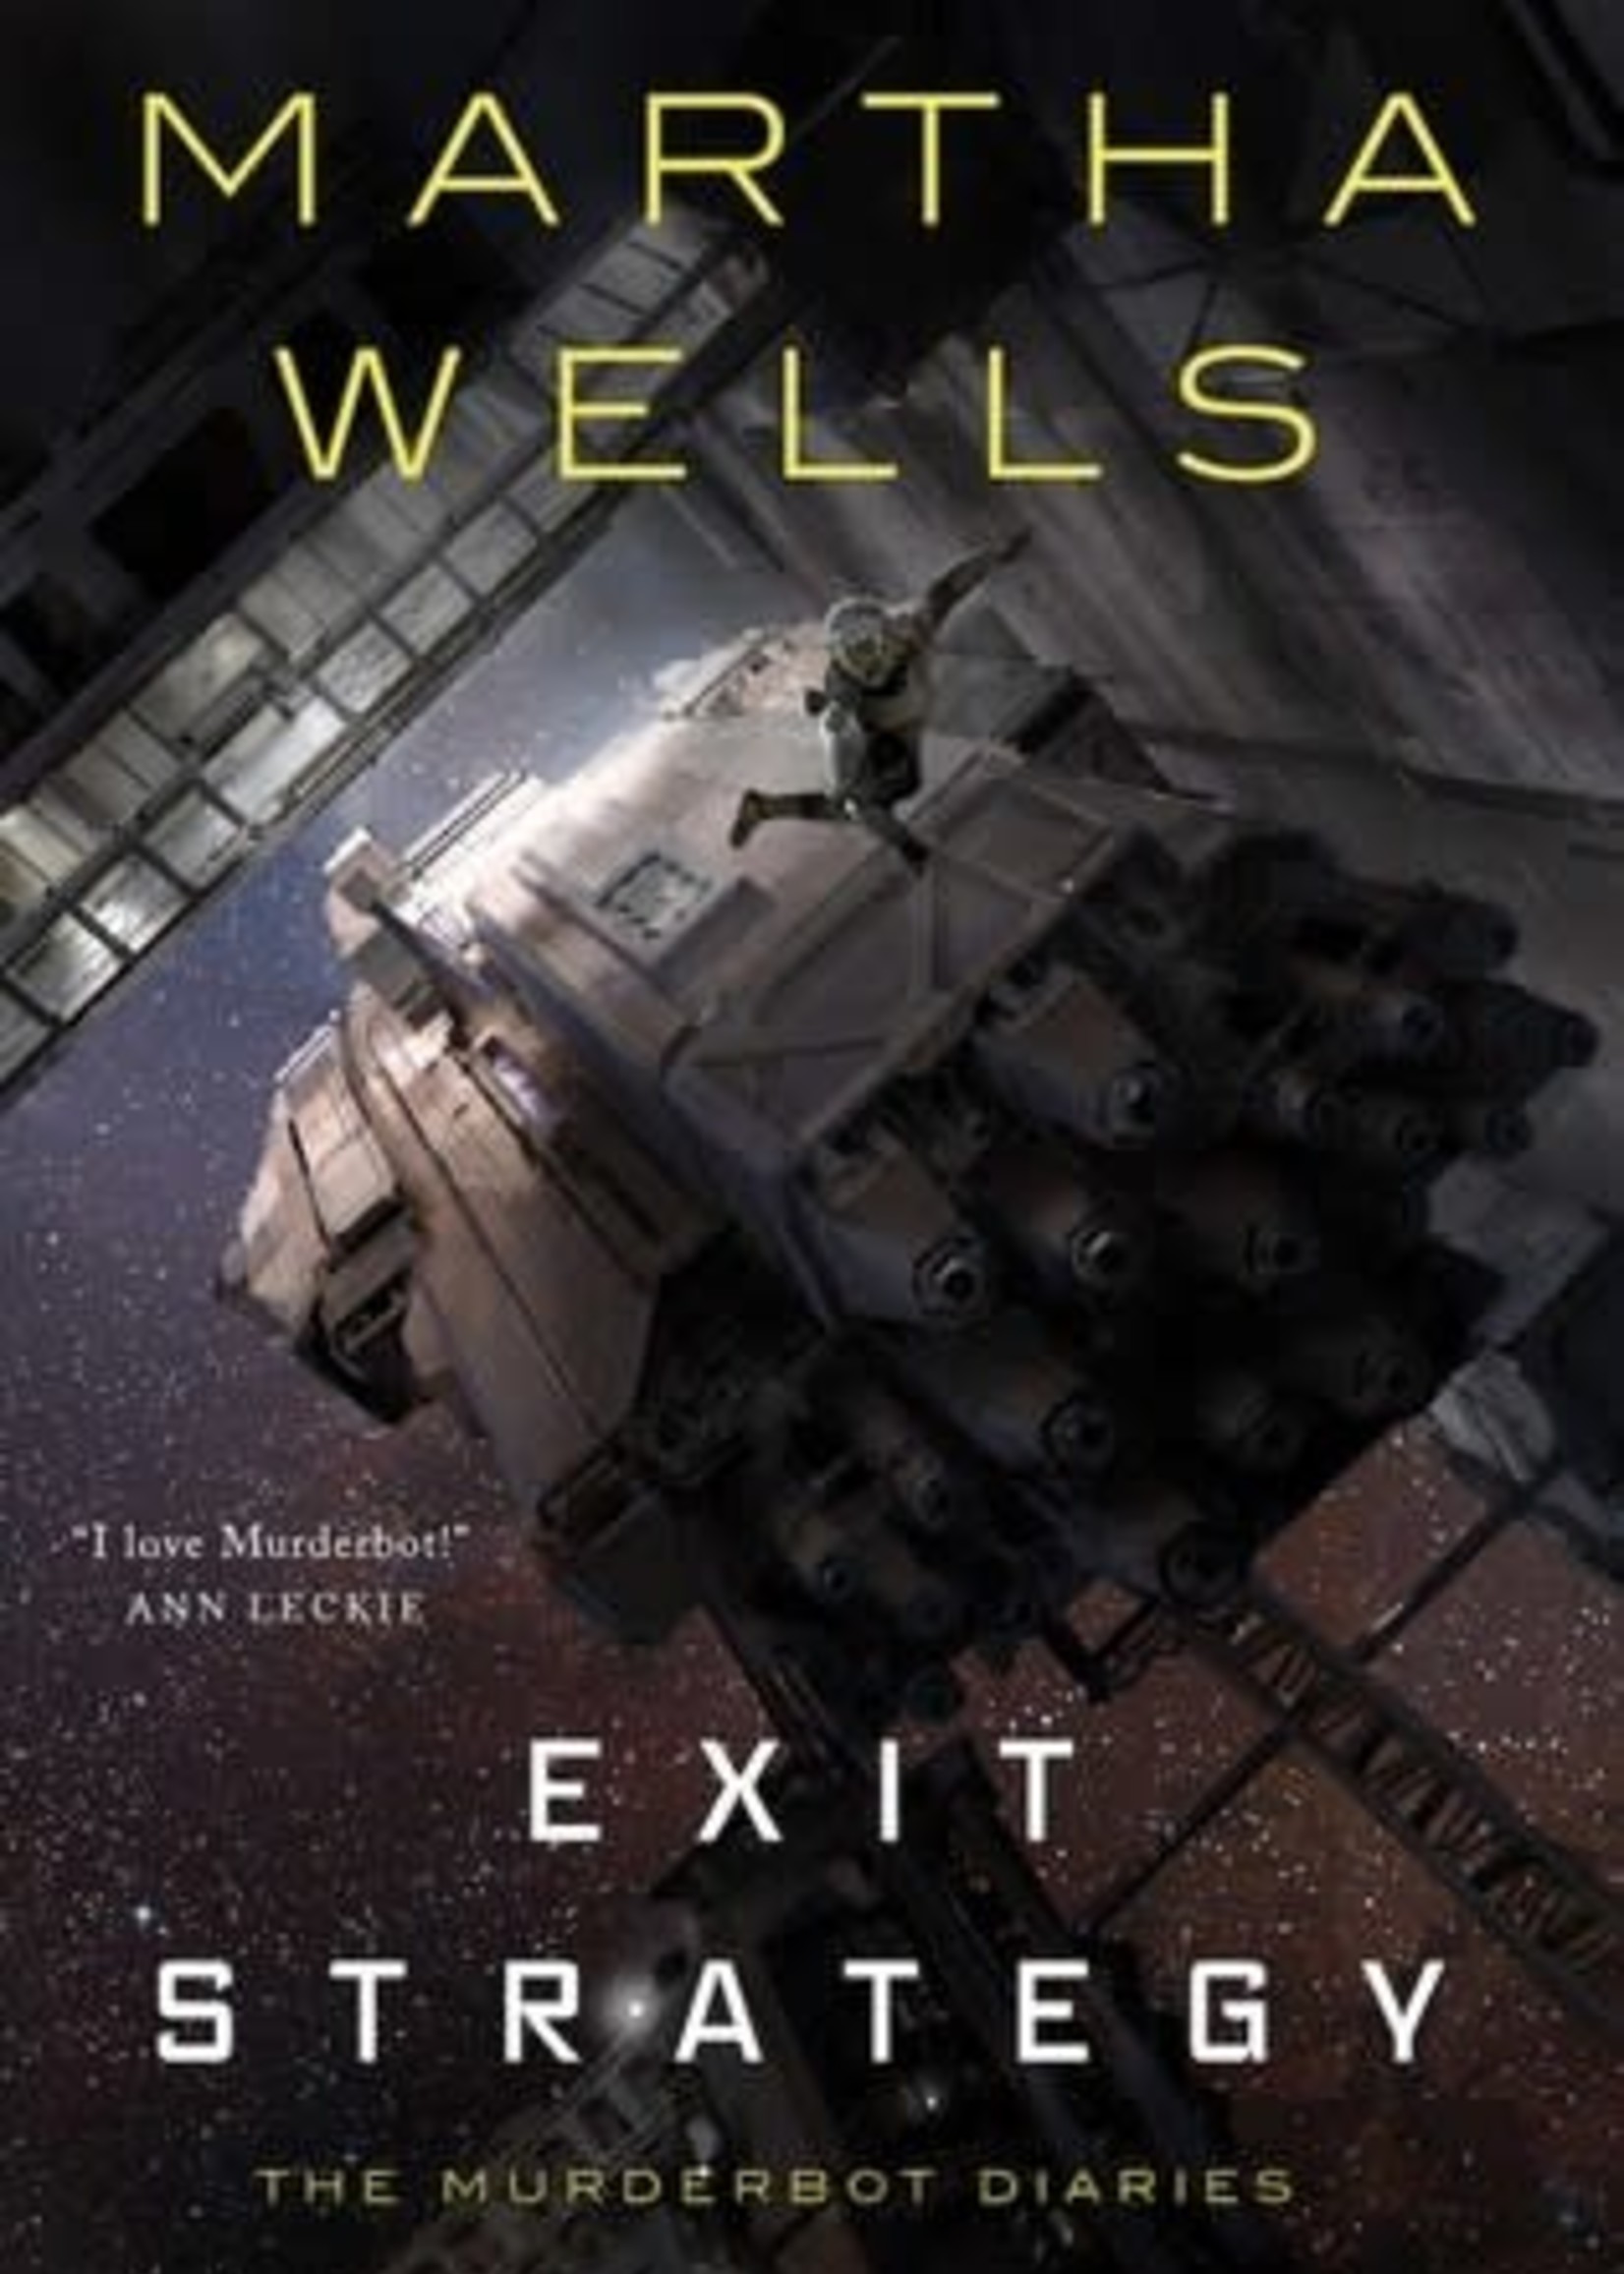 Exit Strategy (The Murderbot Diaries #4) by Martha Wells